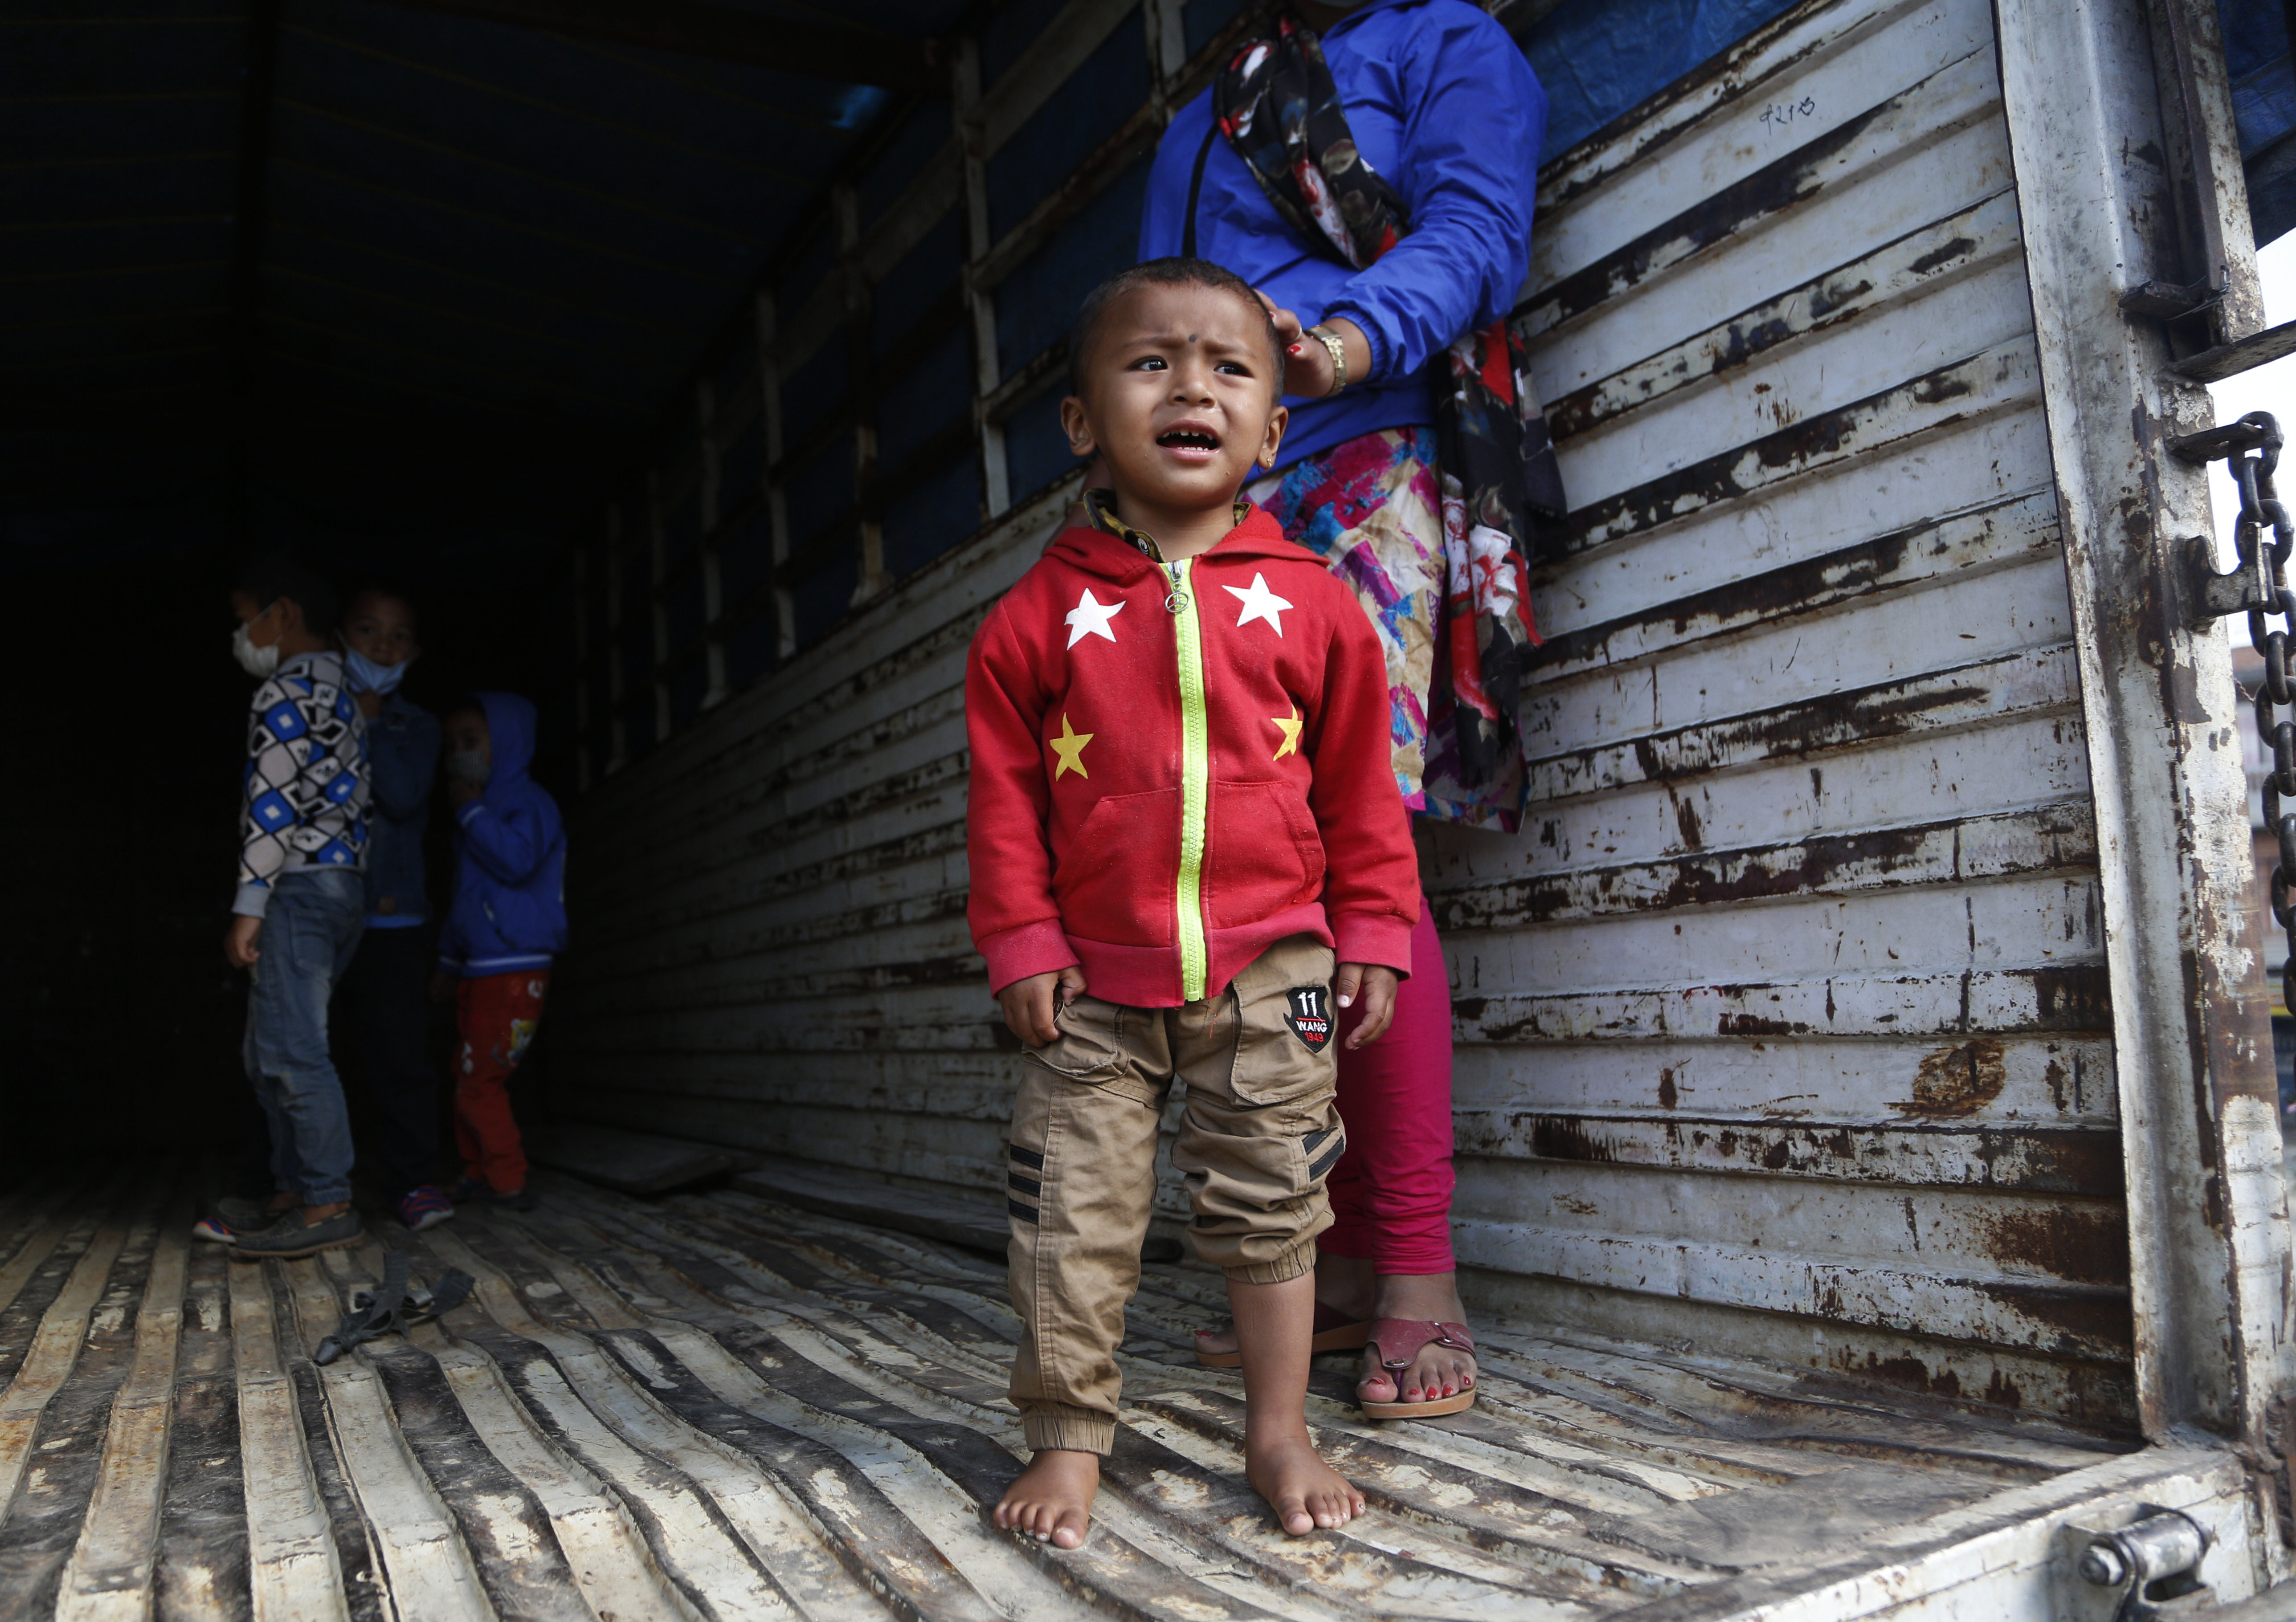 A young Nepalese boy cries as he waits for his father on a vehicle to go back to their village, during lockdown to prevent the spread of the new coronavirus in Bhaktapur, Nepal, Monday, April 20, 2020. The supreme court passed an interim order on Friday instructing the Nepalese government to ensure free transportation for stranded daily wage workers and others making the long journey back to their respective villages on foot. (AP Photo/Niranjan Shrestha)